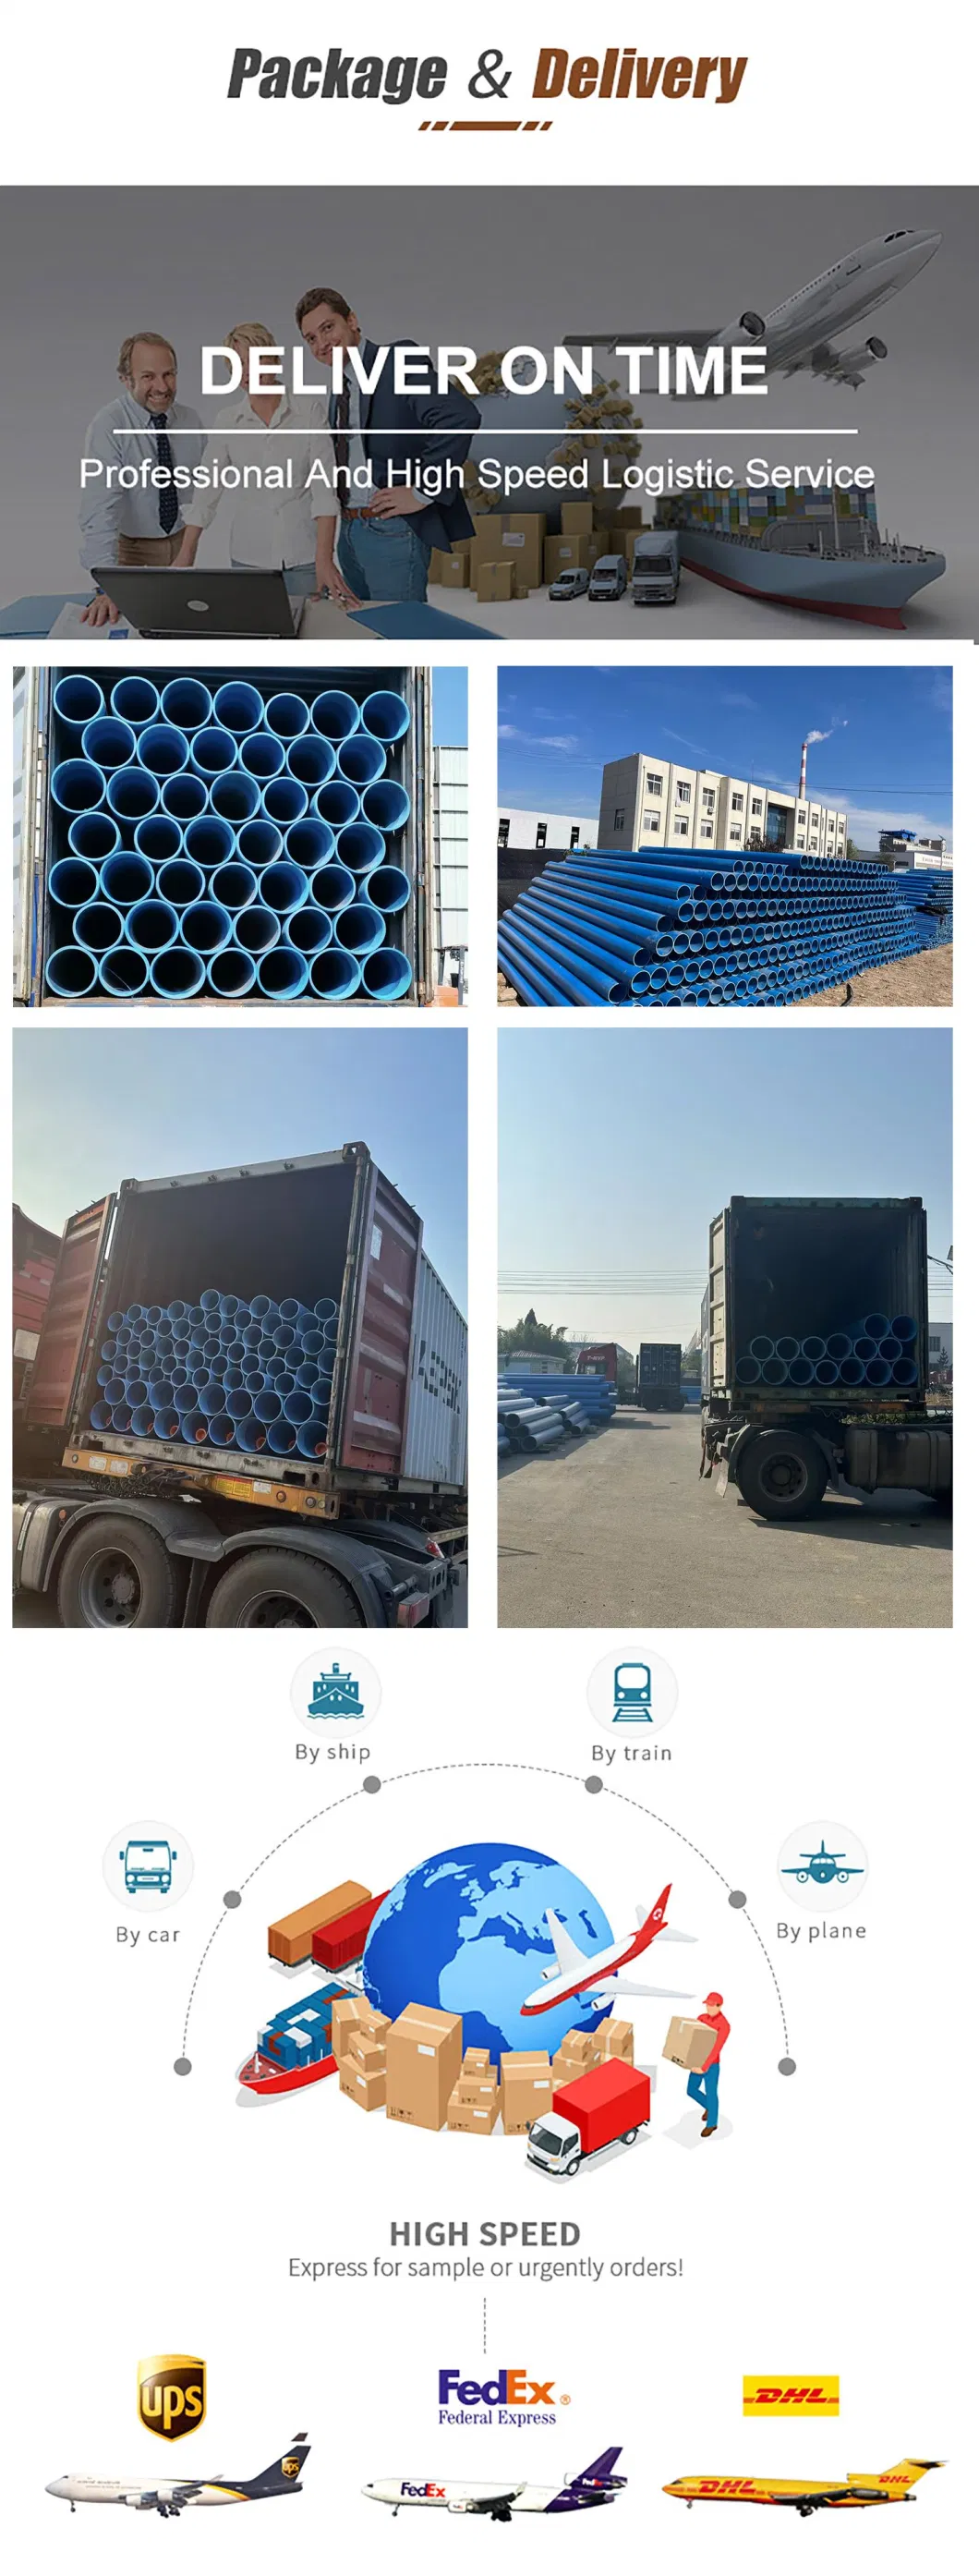 60 Diameter 6.0 Thickness Water Well UPVC Pipe Blue PVC Water Well Casing Tube with Thread Connection Made in China